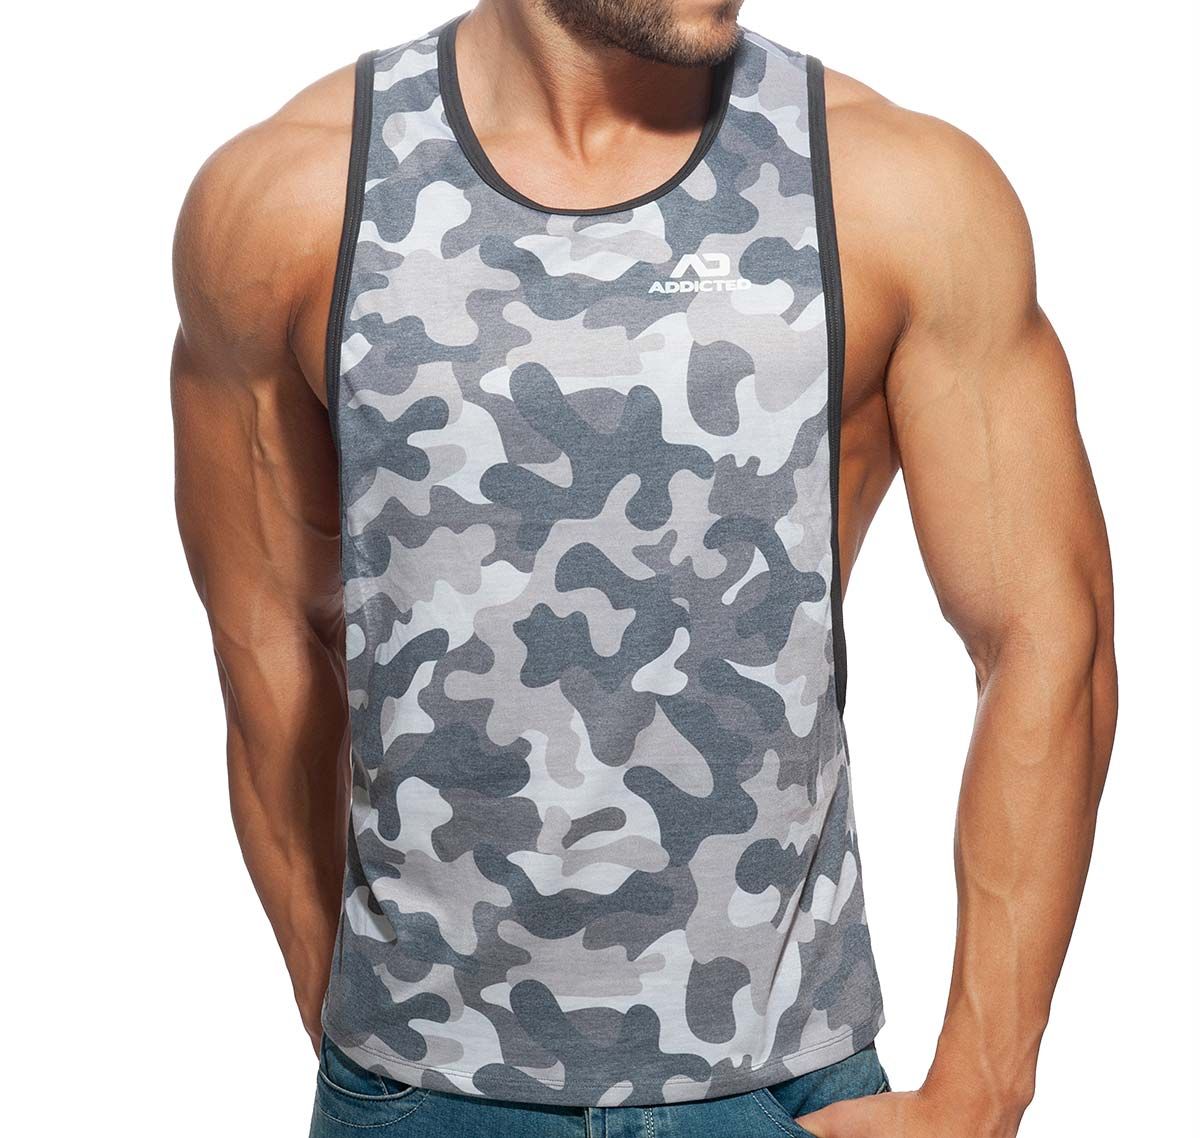 Addicted Débardeur AD FANTASY LOW RIDER AD958, gris camouflage